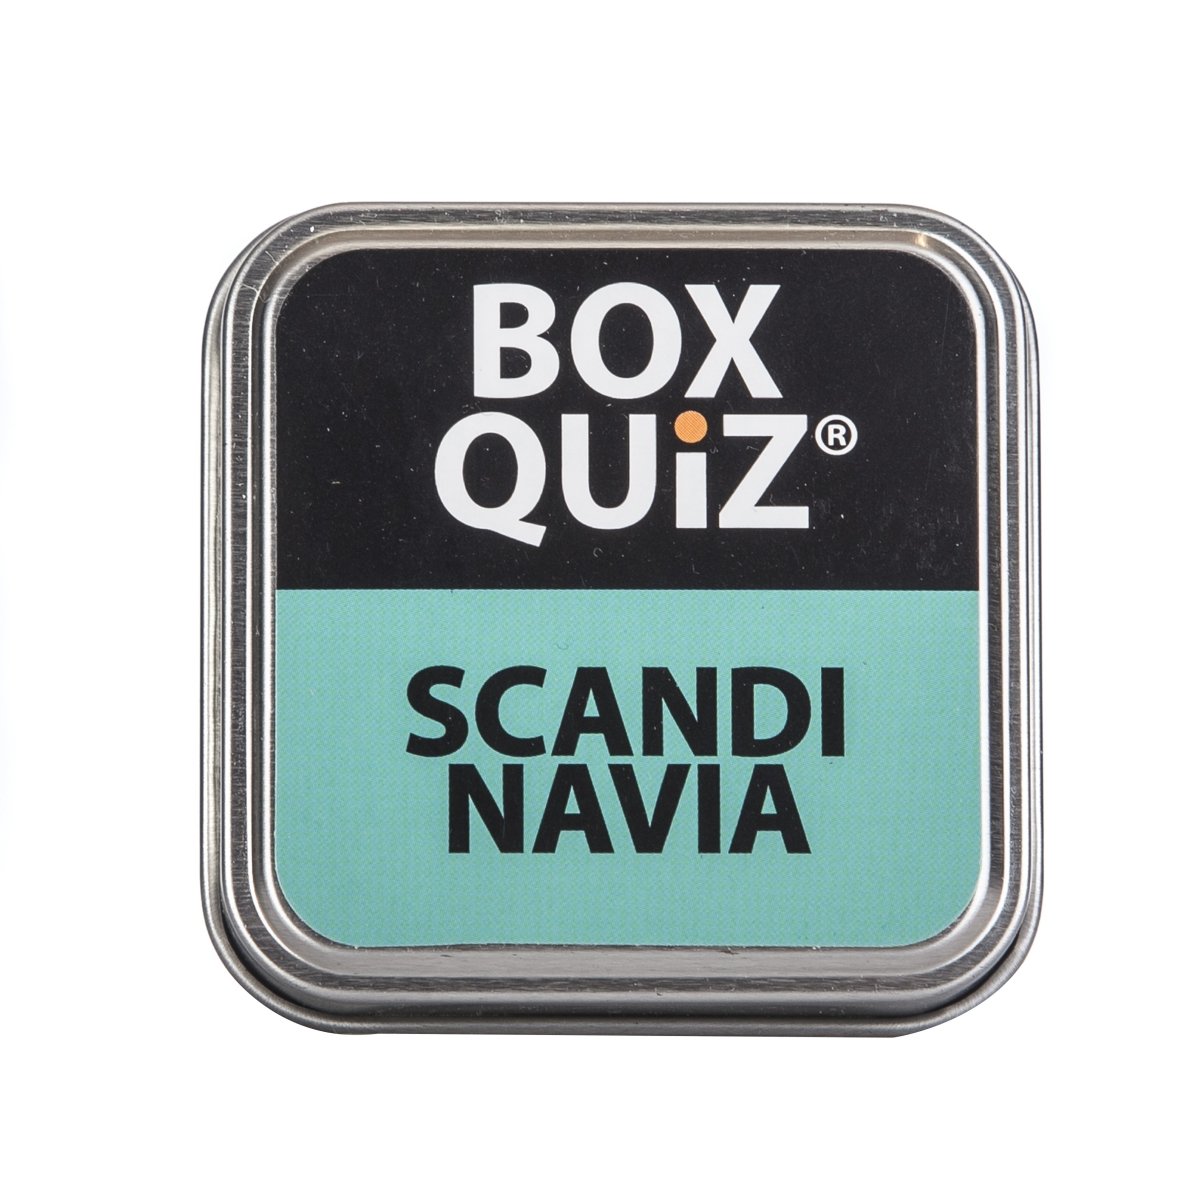 Quiz game about Scandinavia in English